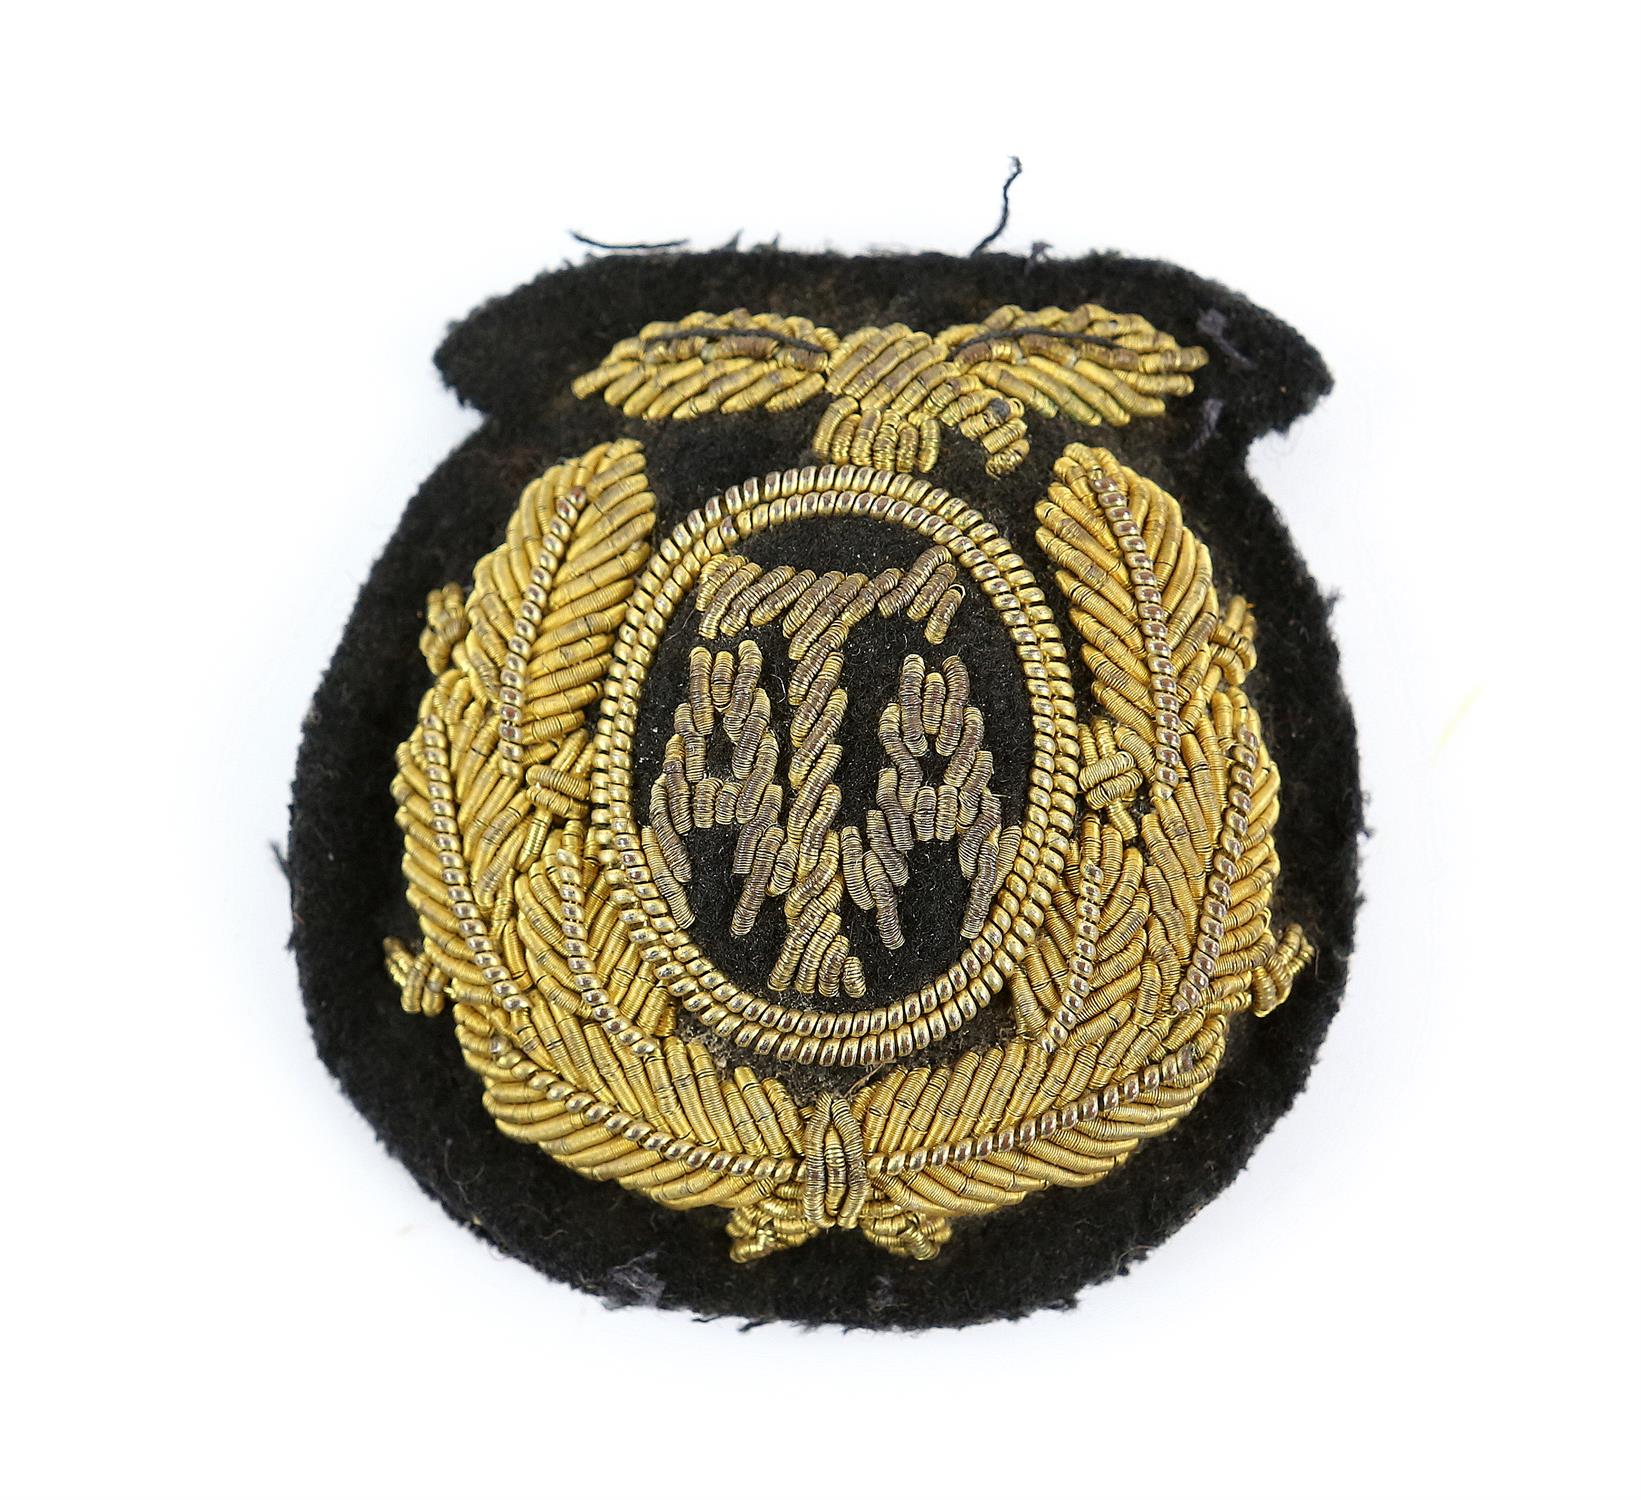 WW2 Air Transport Auxiliary (A.T.A) Cap Badge, bullion wire wreath with ATA to the centre and eagle